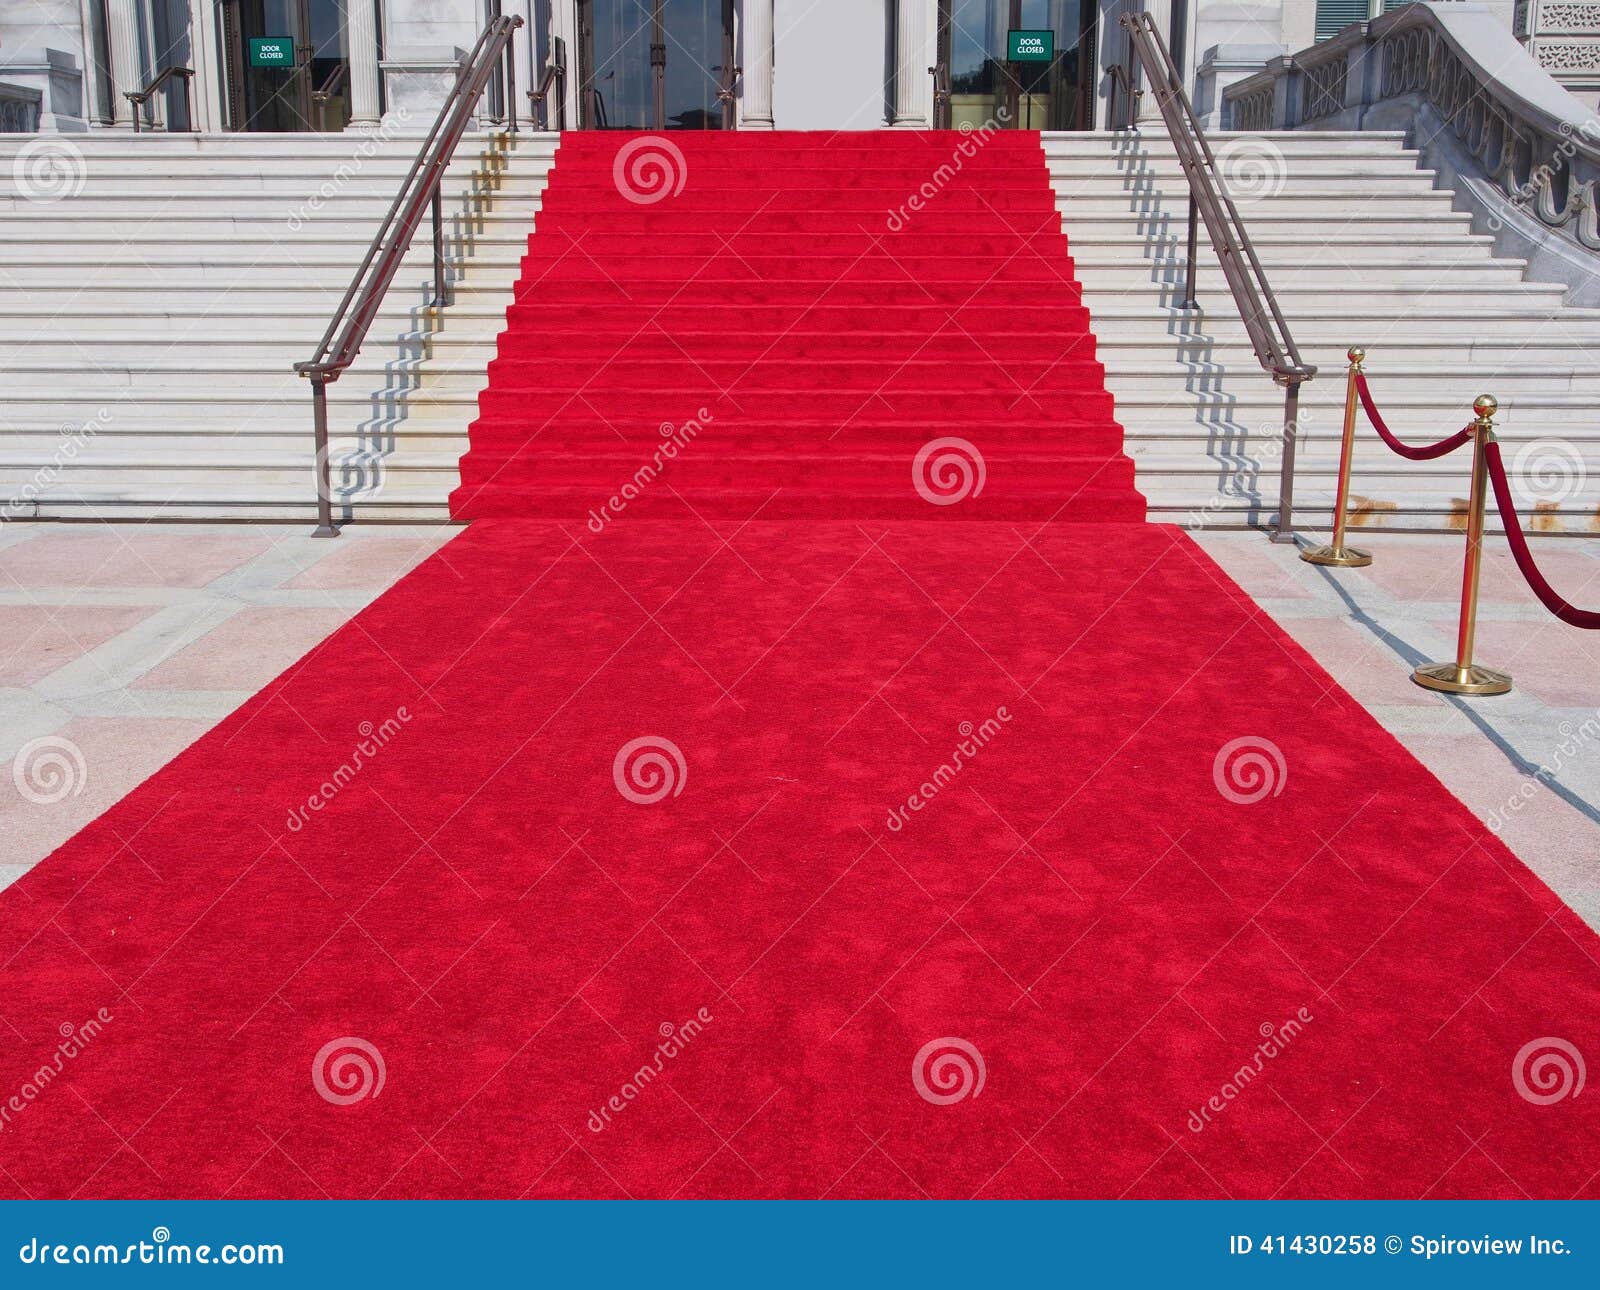 steps with red carpet